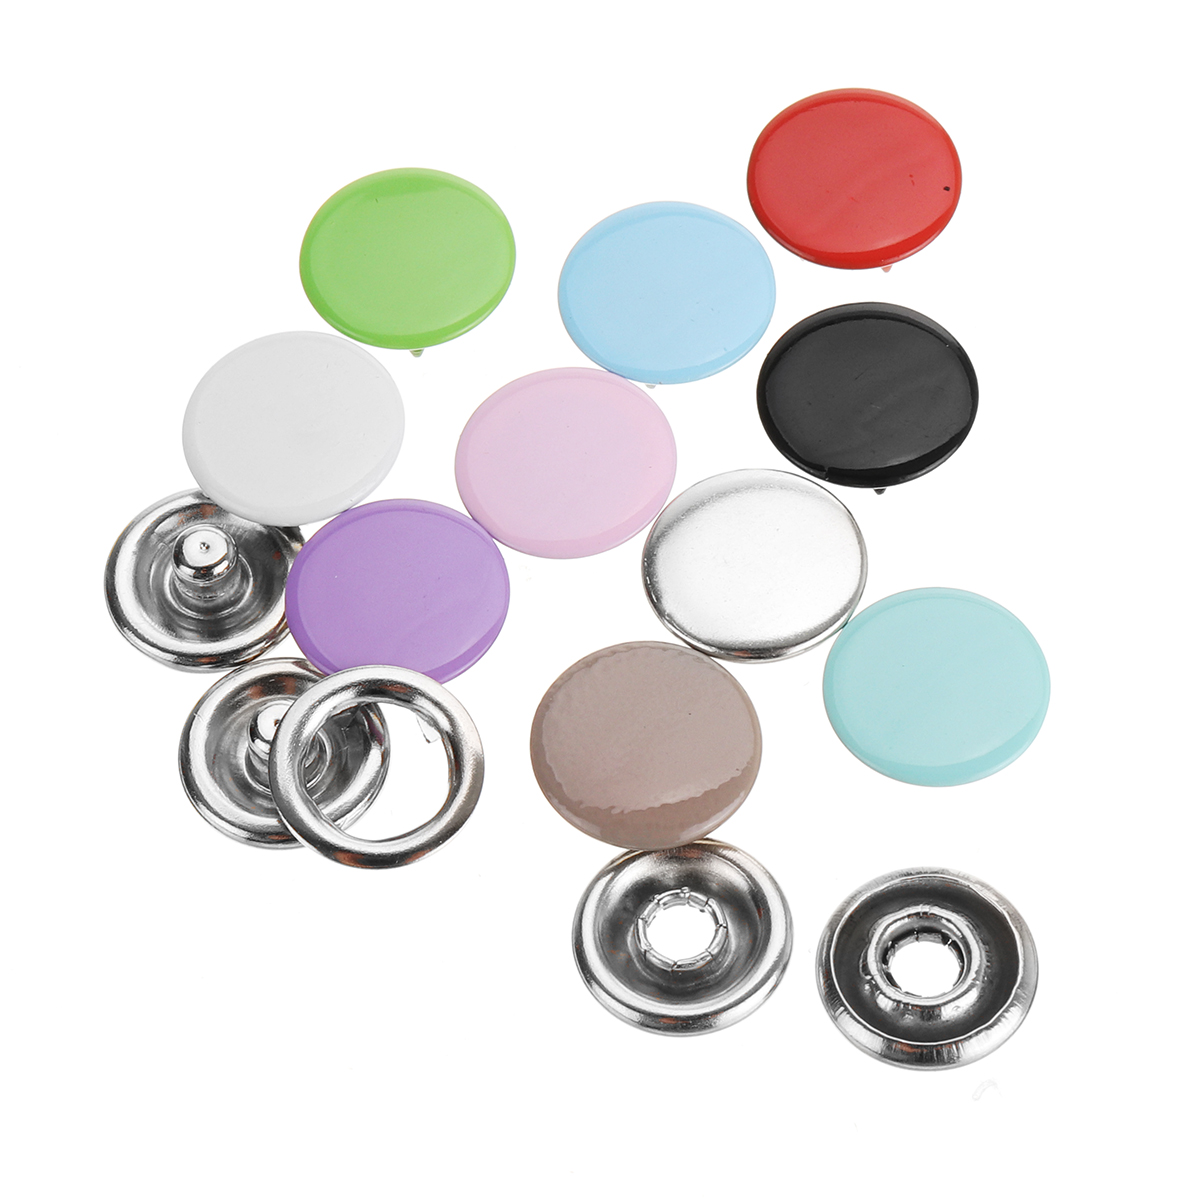 150-Sets-Stainless-Steel-Buttons-Snaps-Fasteners-Dummy-Clips-Press-Studs-10-Colors-1451584-1